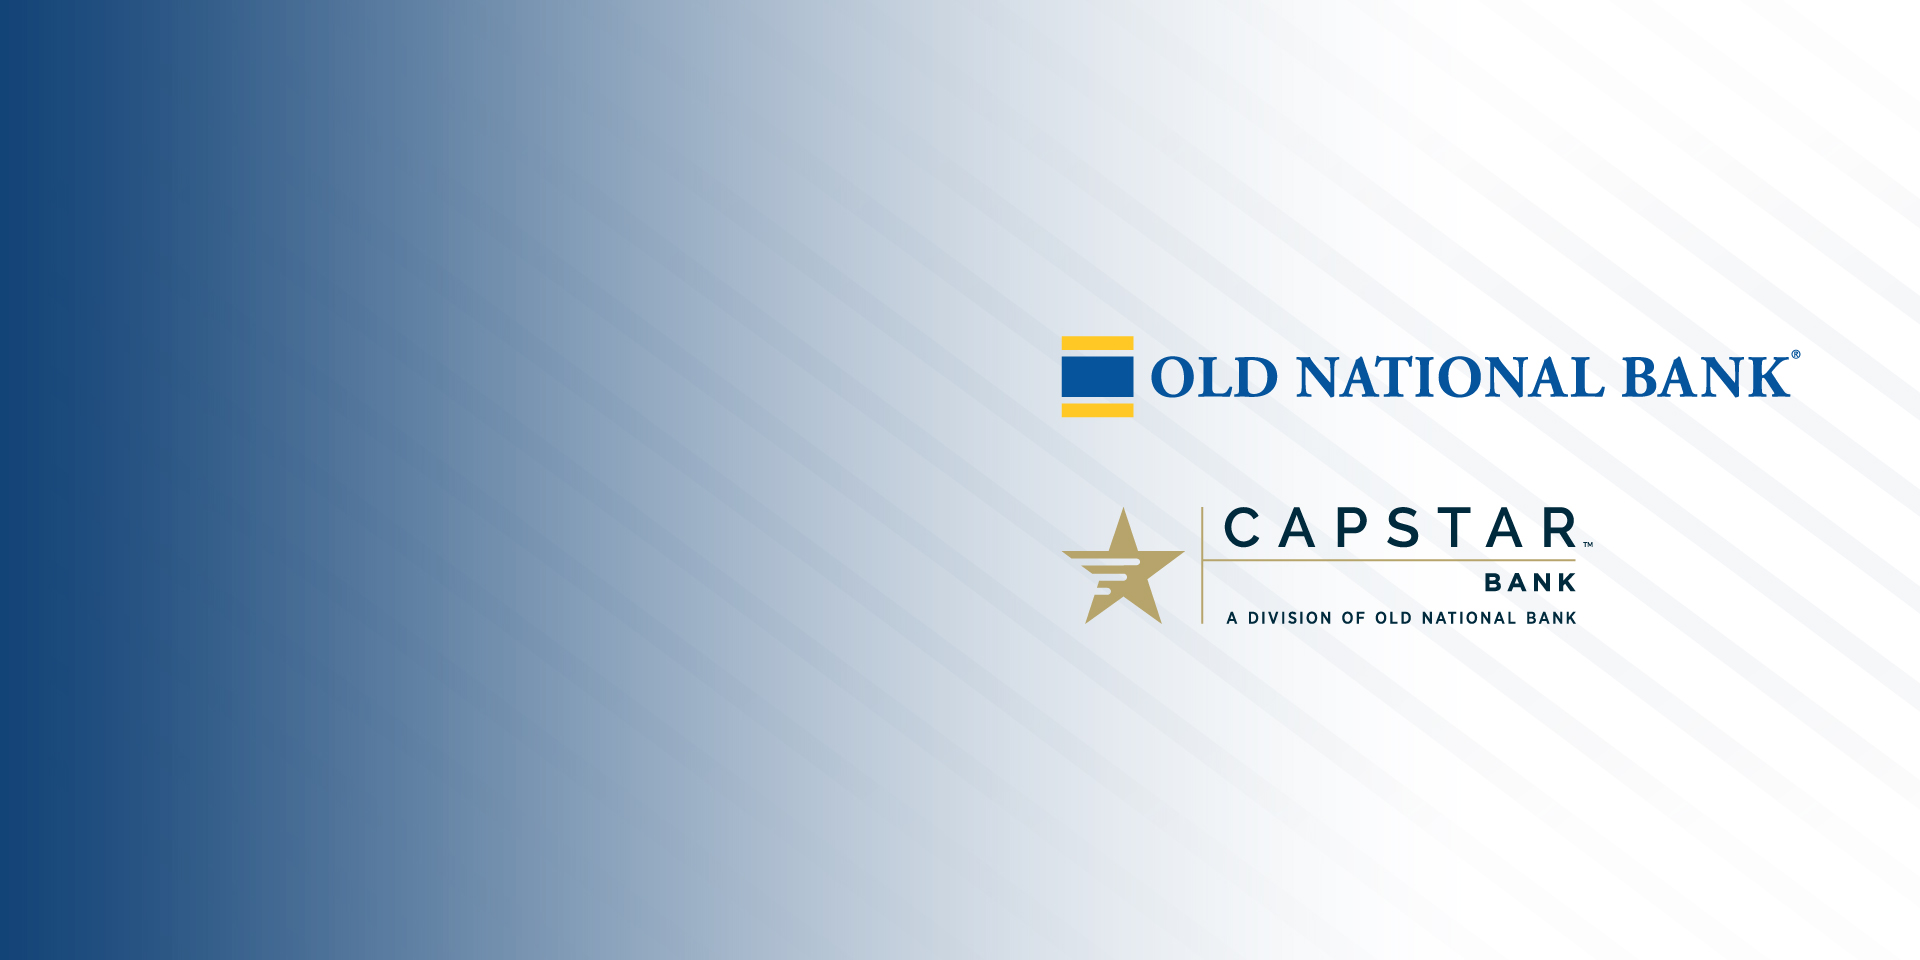 Capstar and Old National Bank